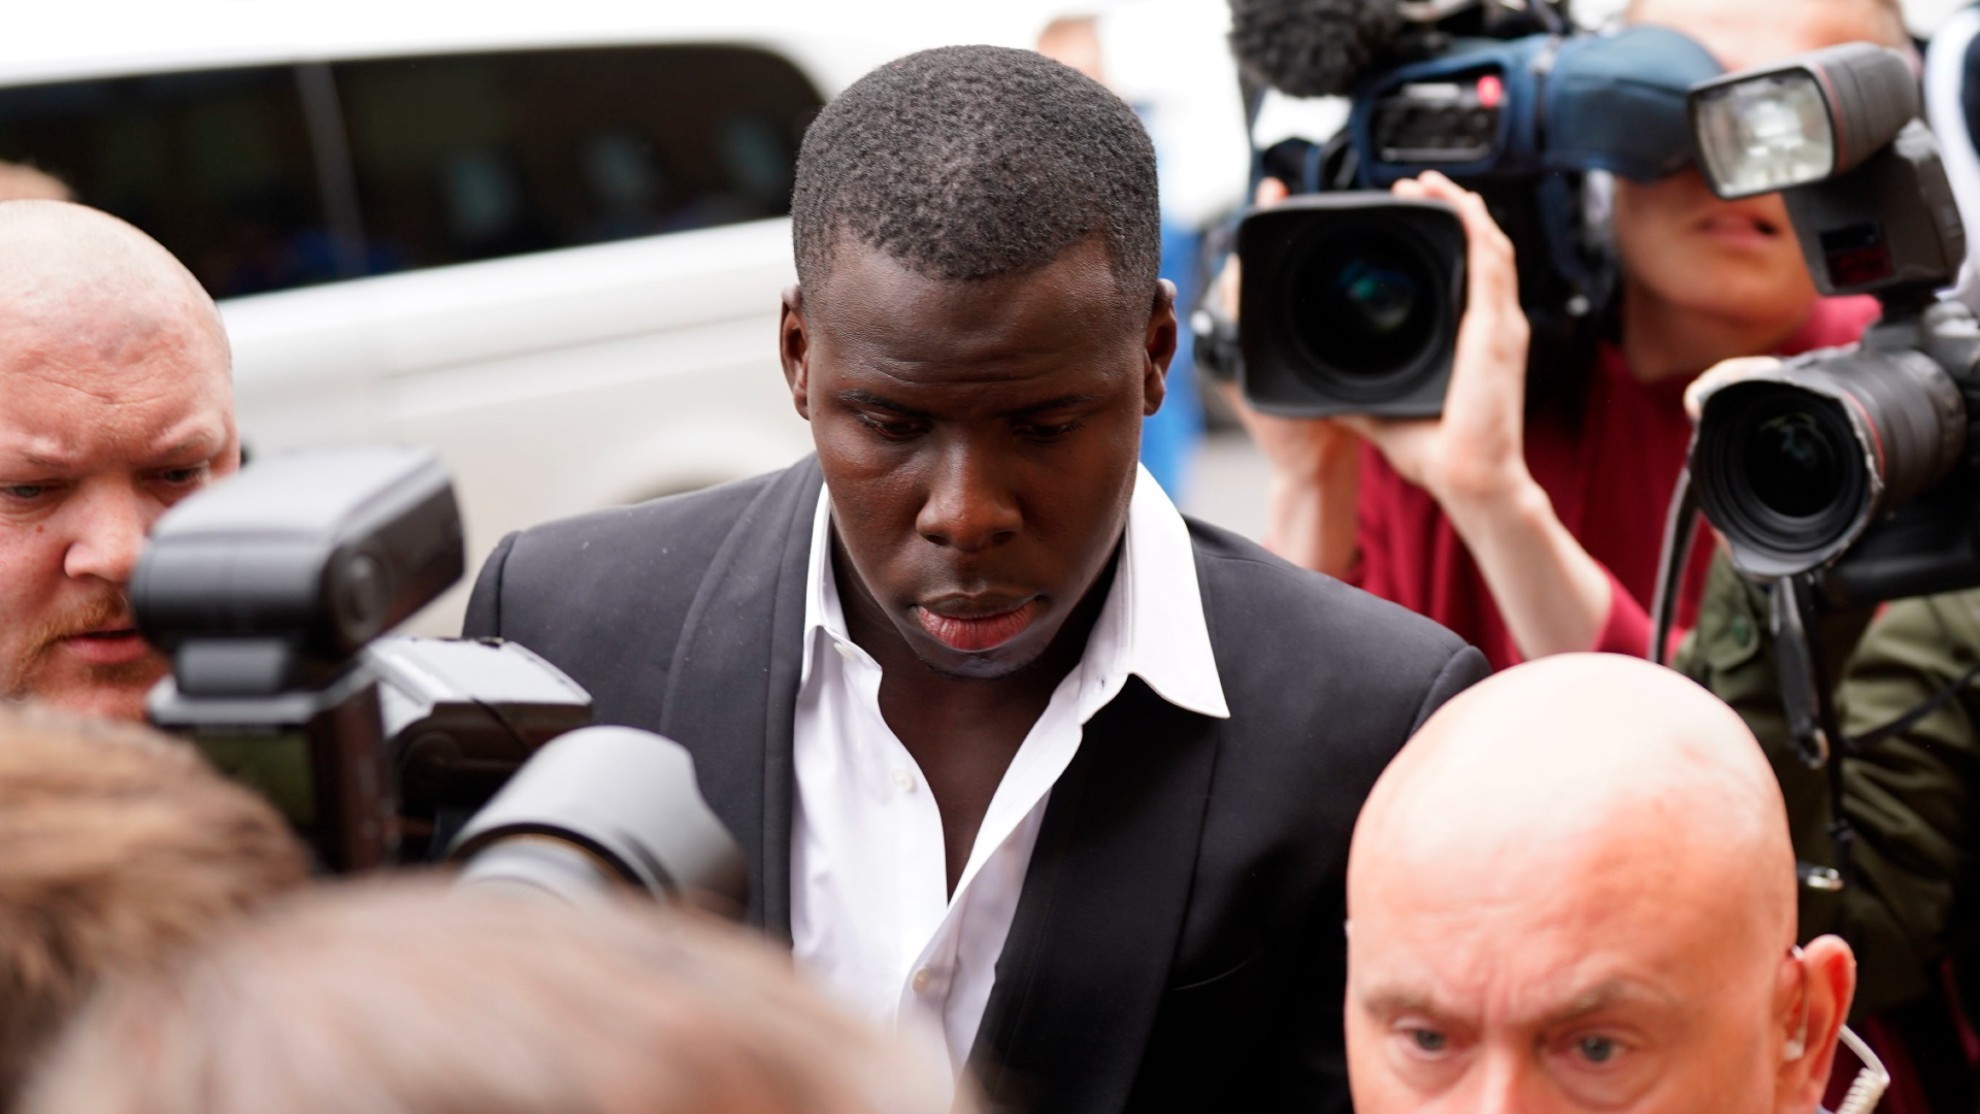 West Ham United player Kurt Zouma arrives at Thames Magistrates' Court in London.